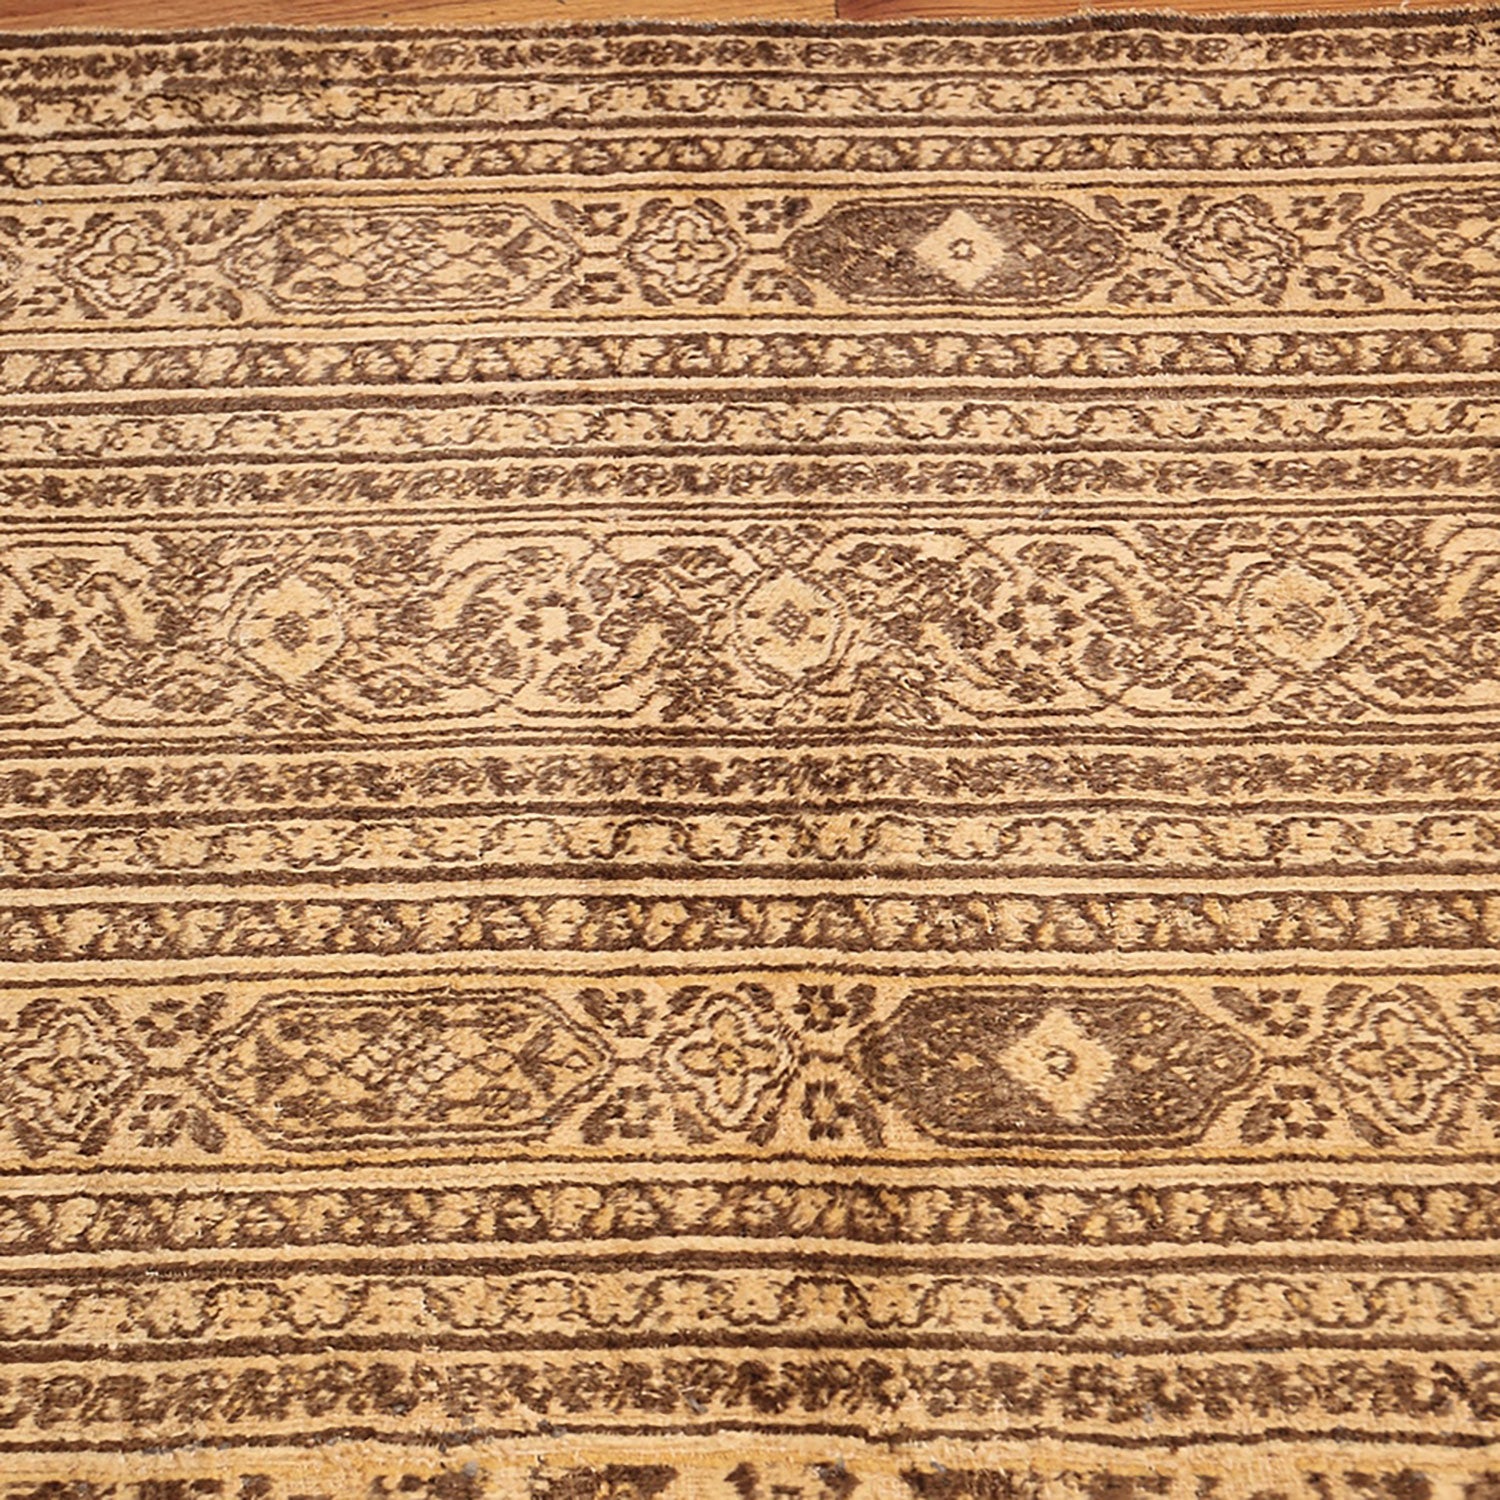 Close-up of intricate, aged Oriental rug showcasing traditional patterns and textures.